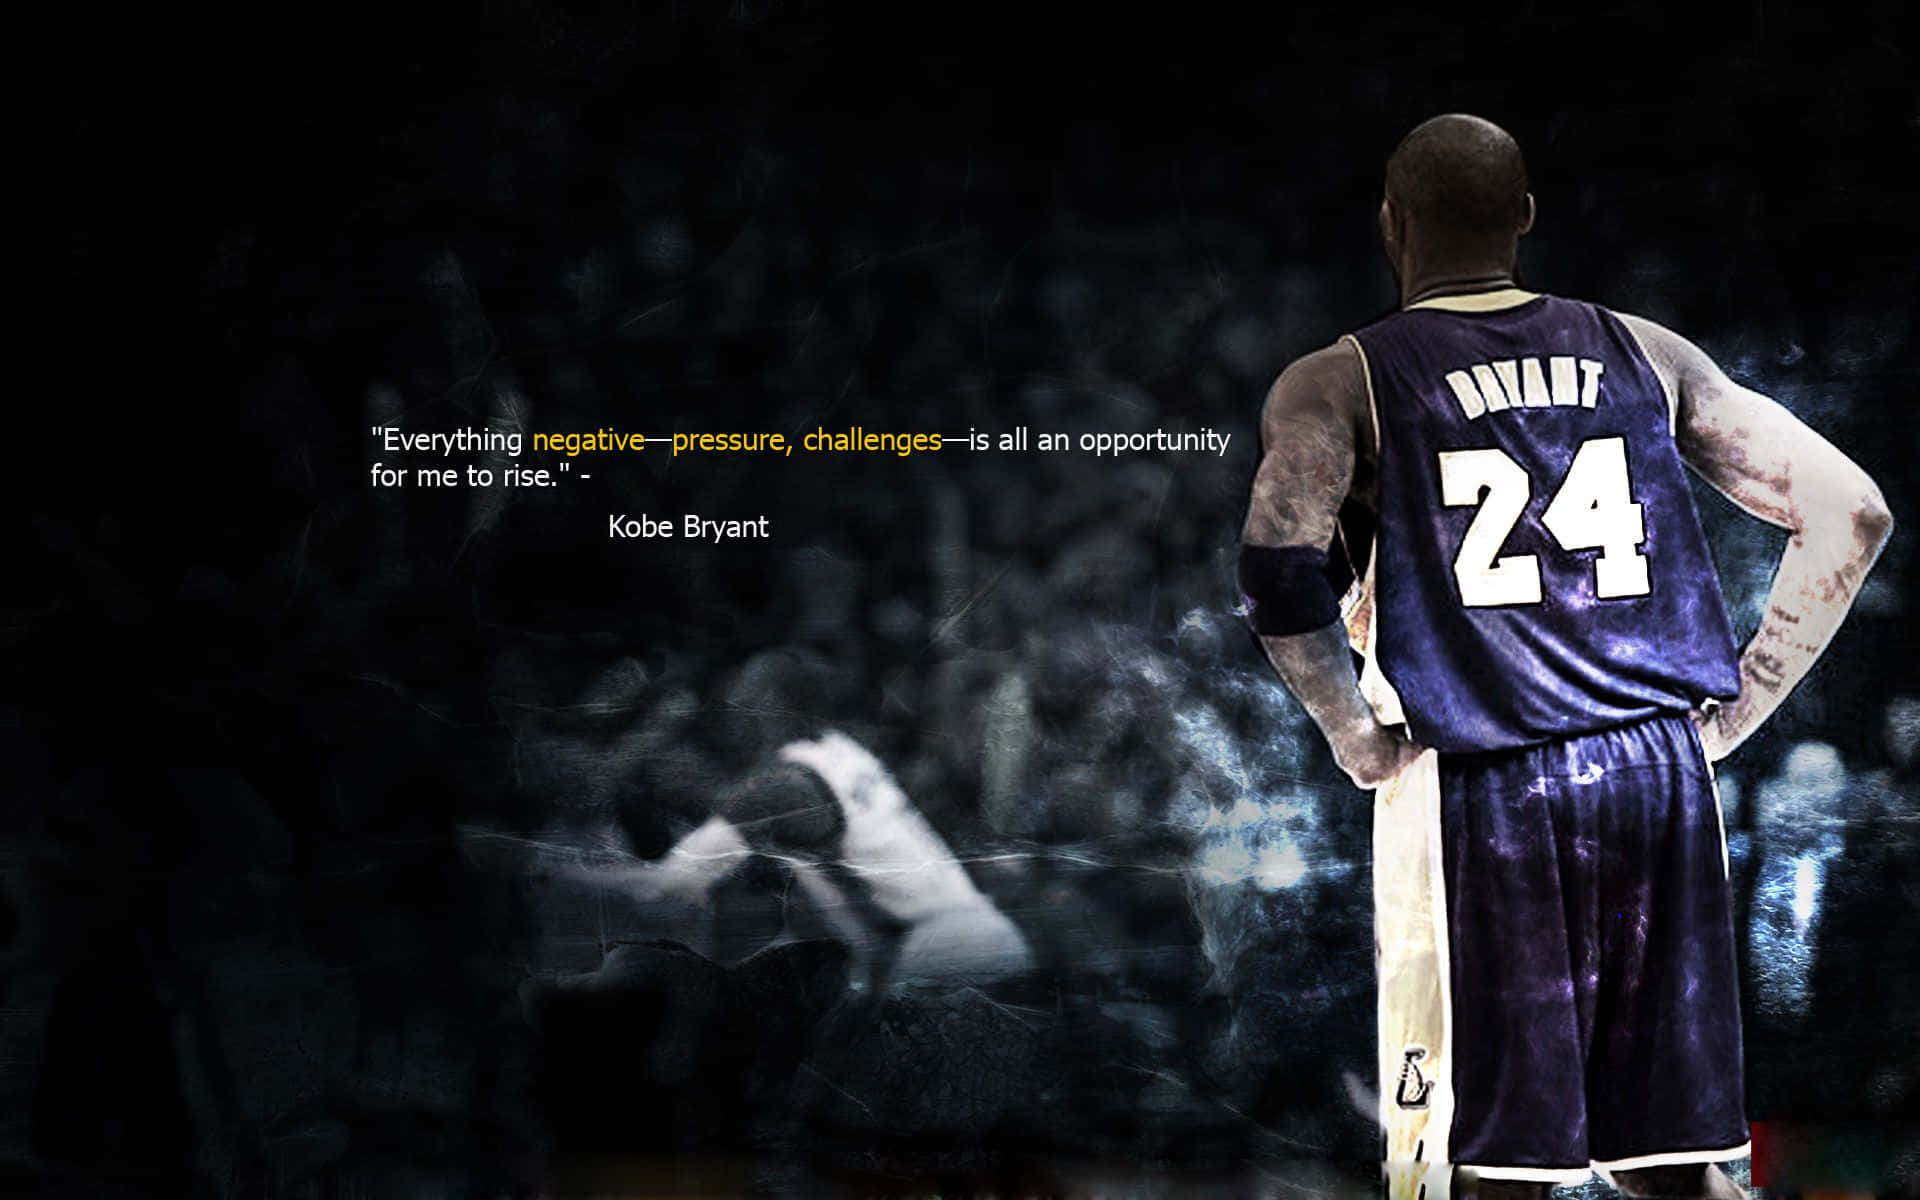 Kobe Bryant - a legend, who will always be remembered